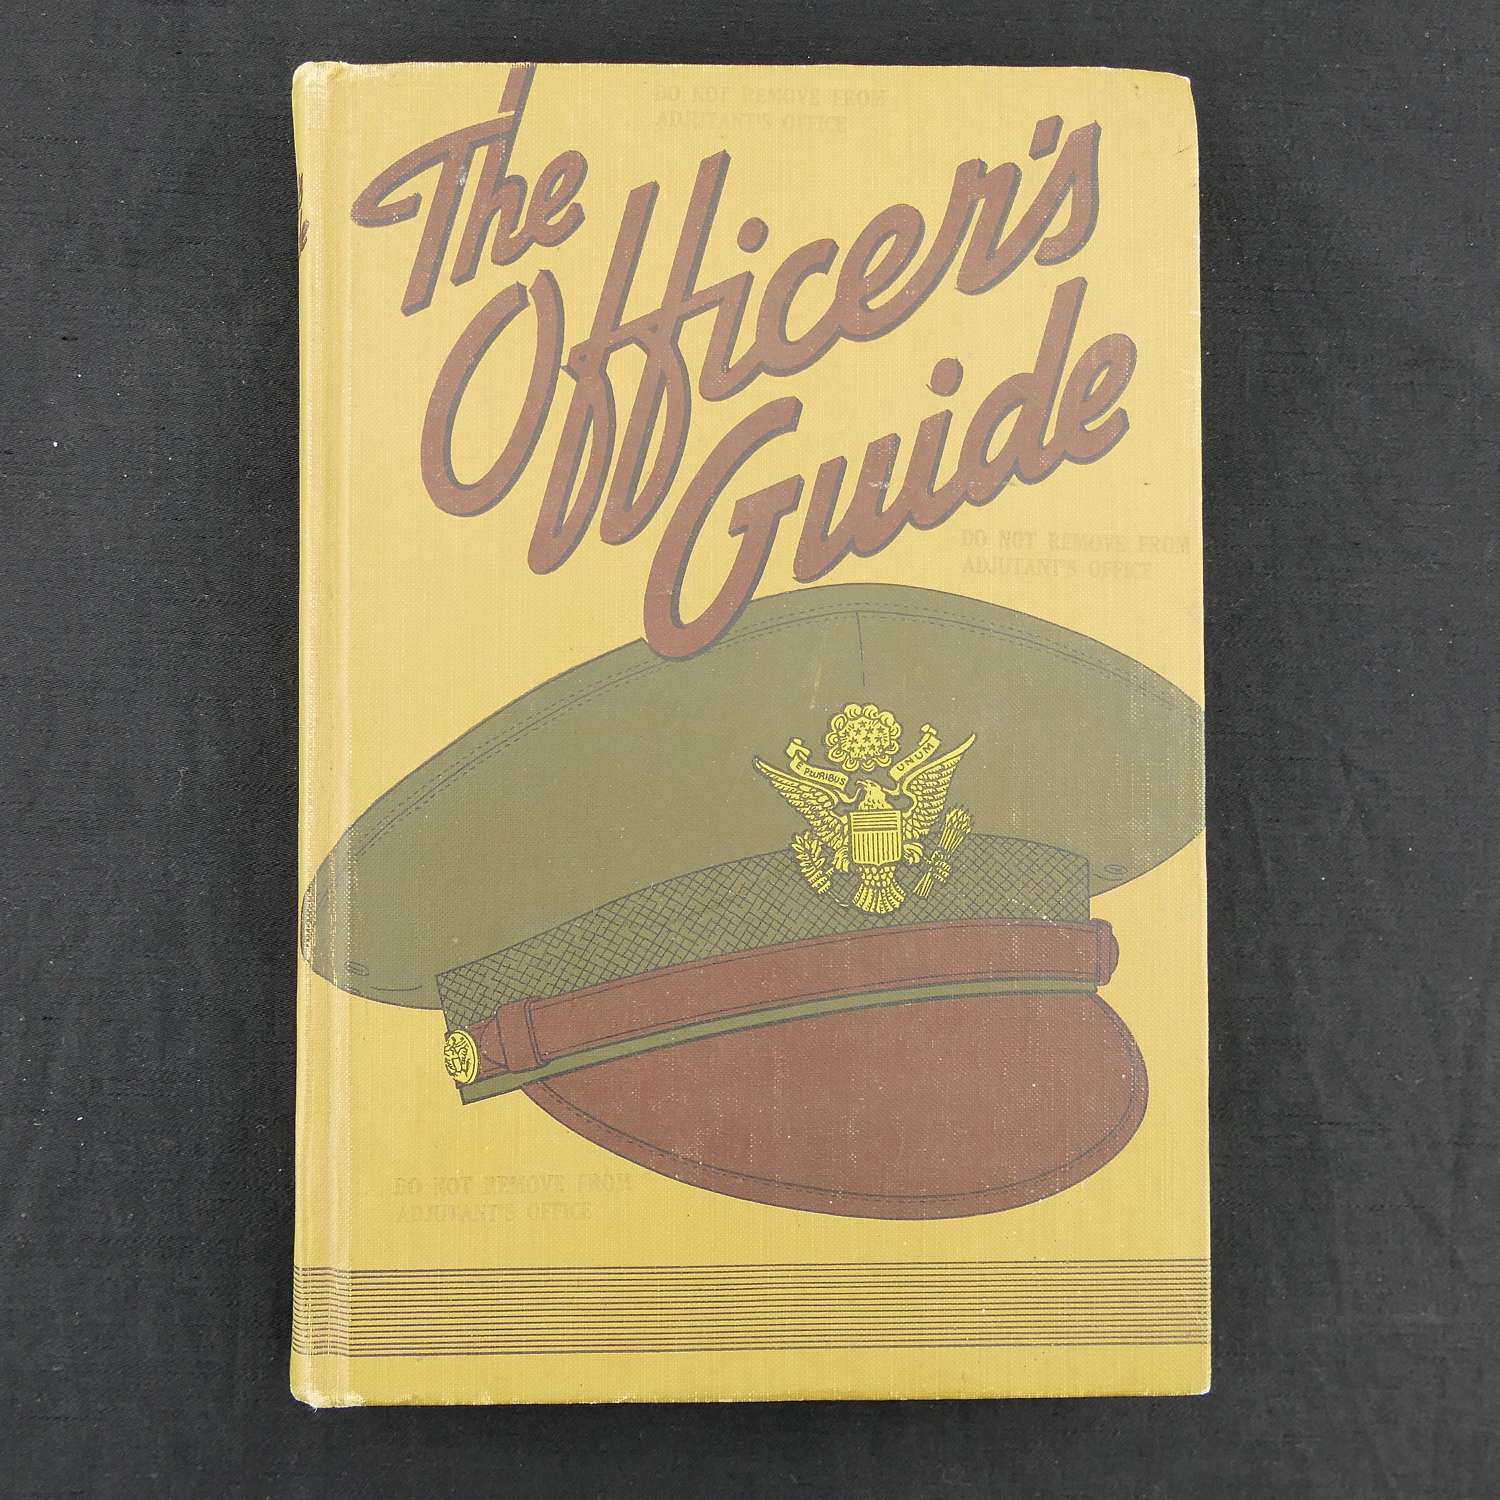 The Officer's Guide c.1943